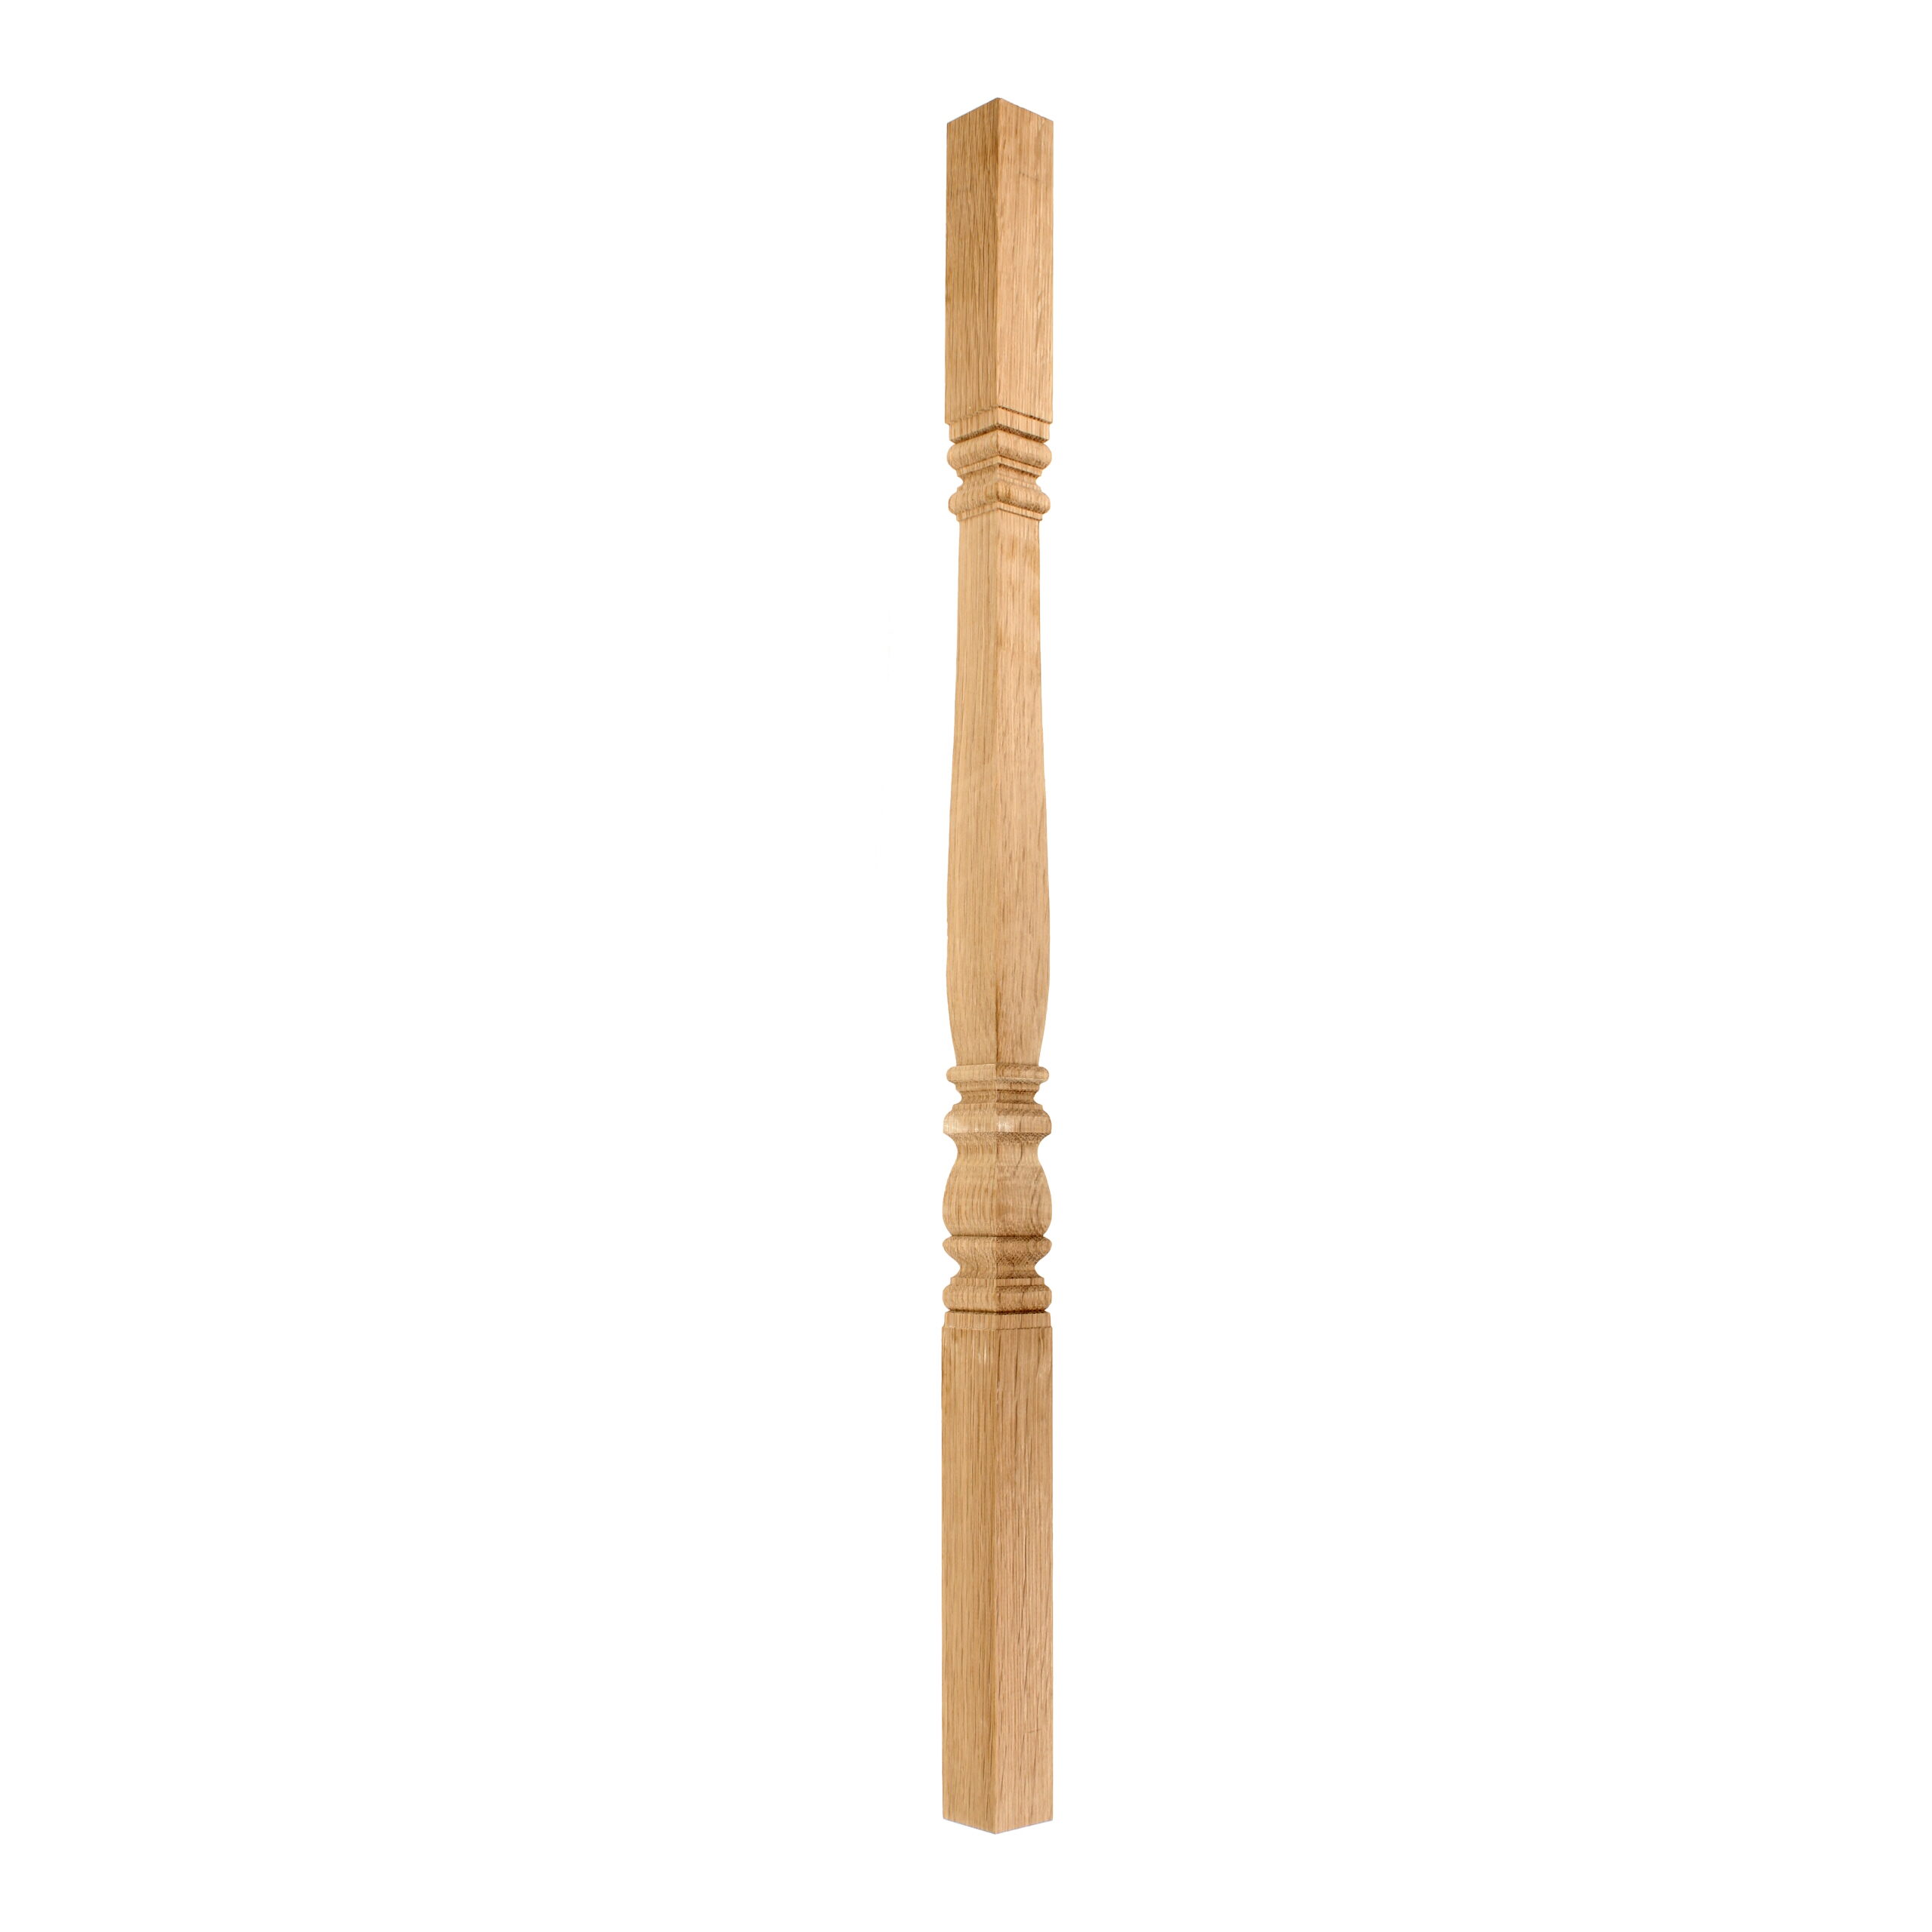 AW Oak-Square Turned Colonial No 2-41mm x 900 - Wooden Staircase Spindle